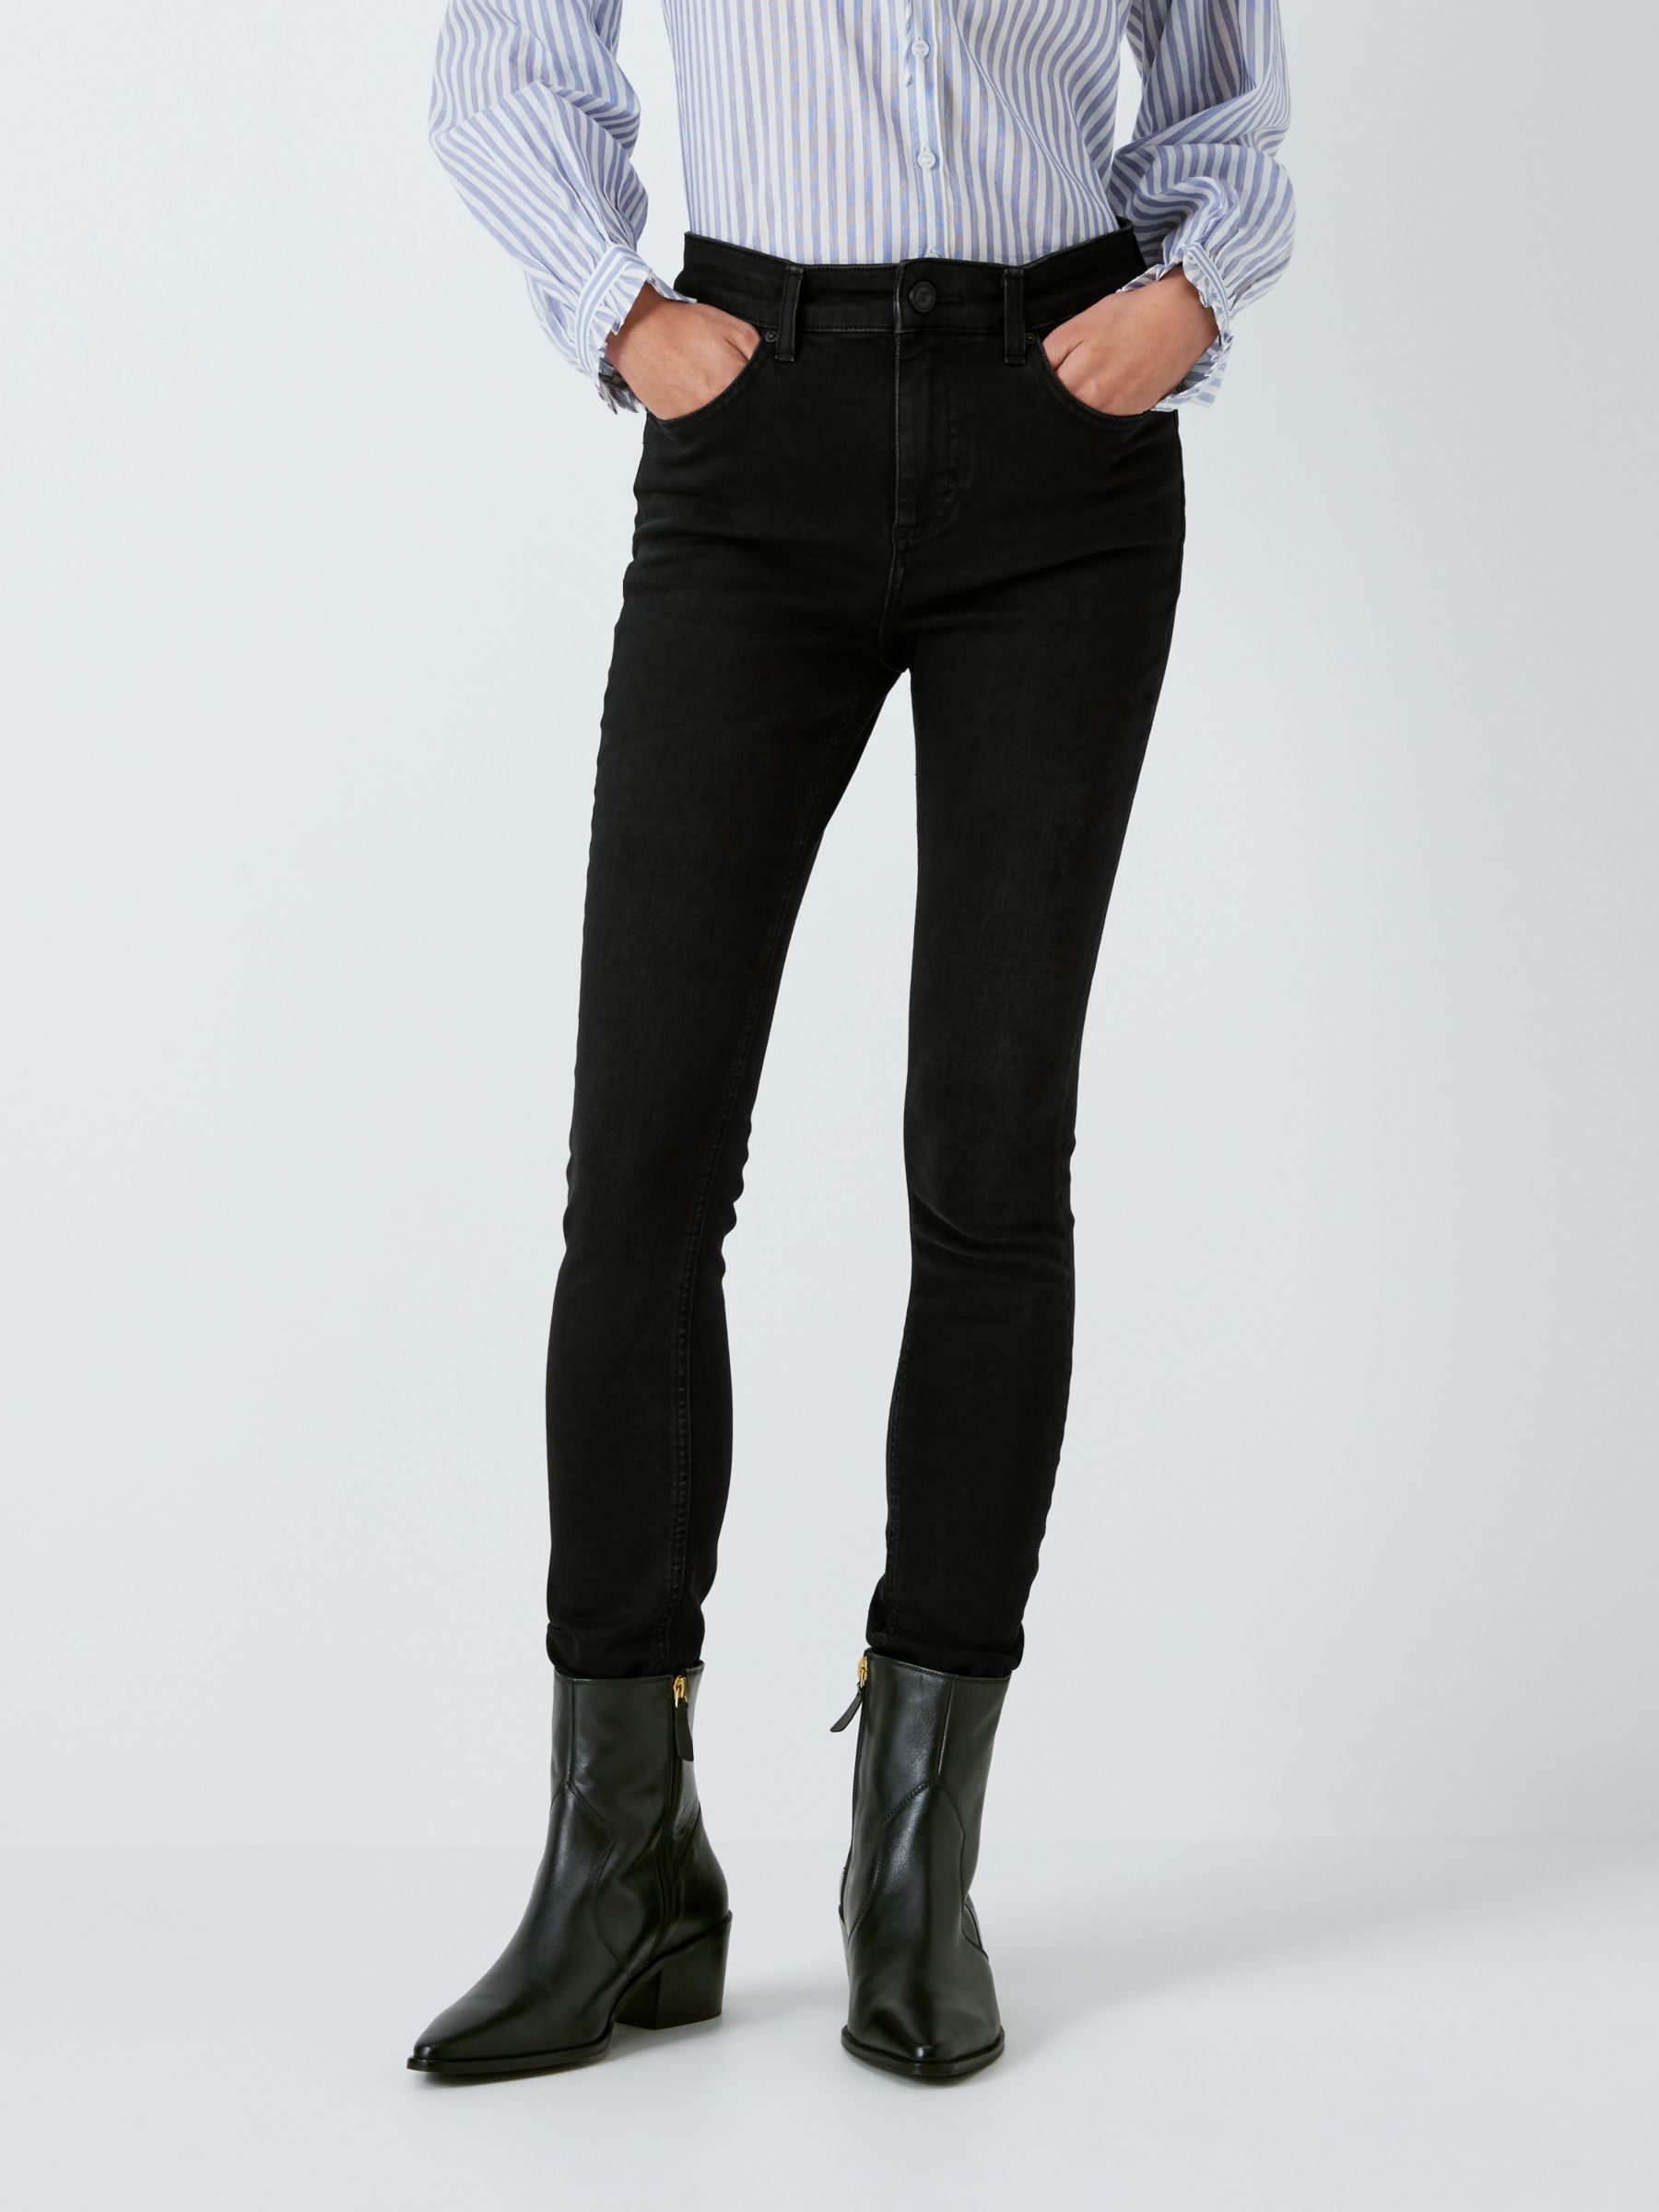 AND/OR Abbot Kinney Skinny Jeans, Washed Black, 34